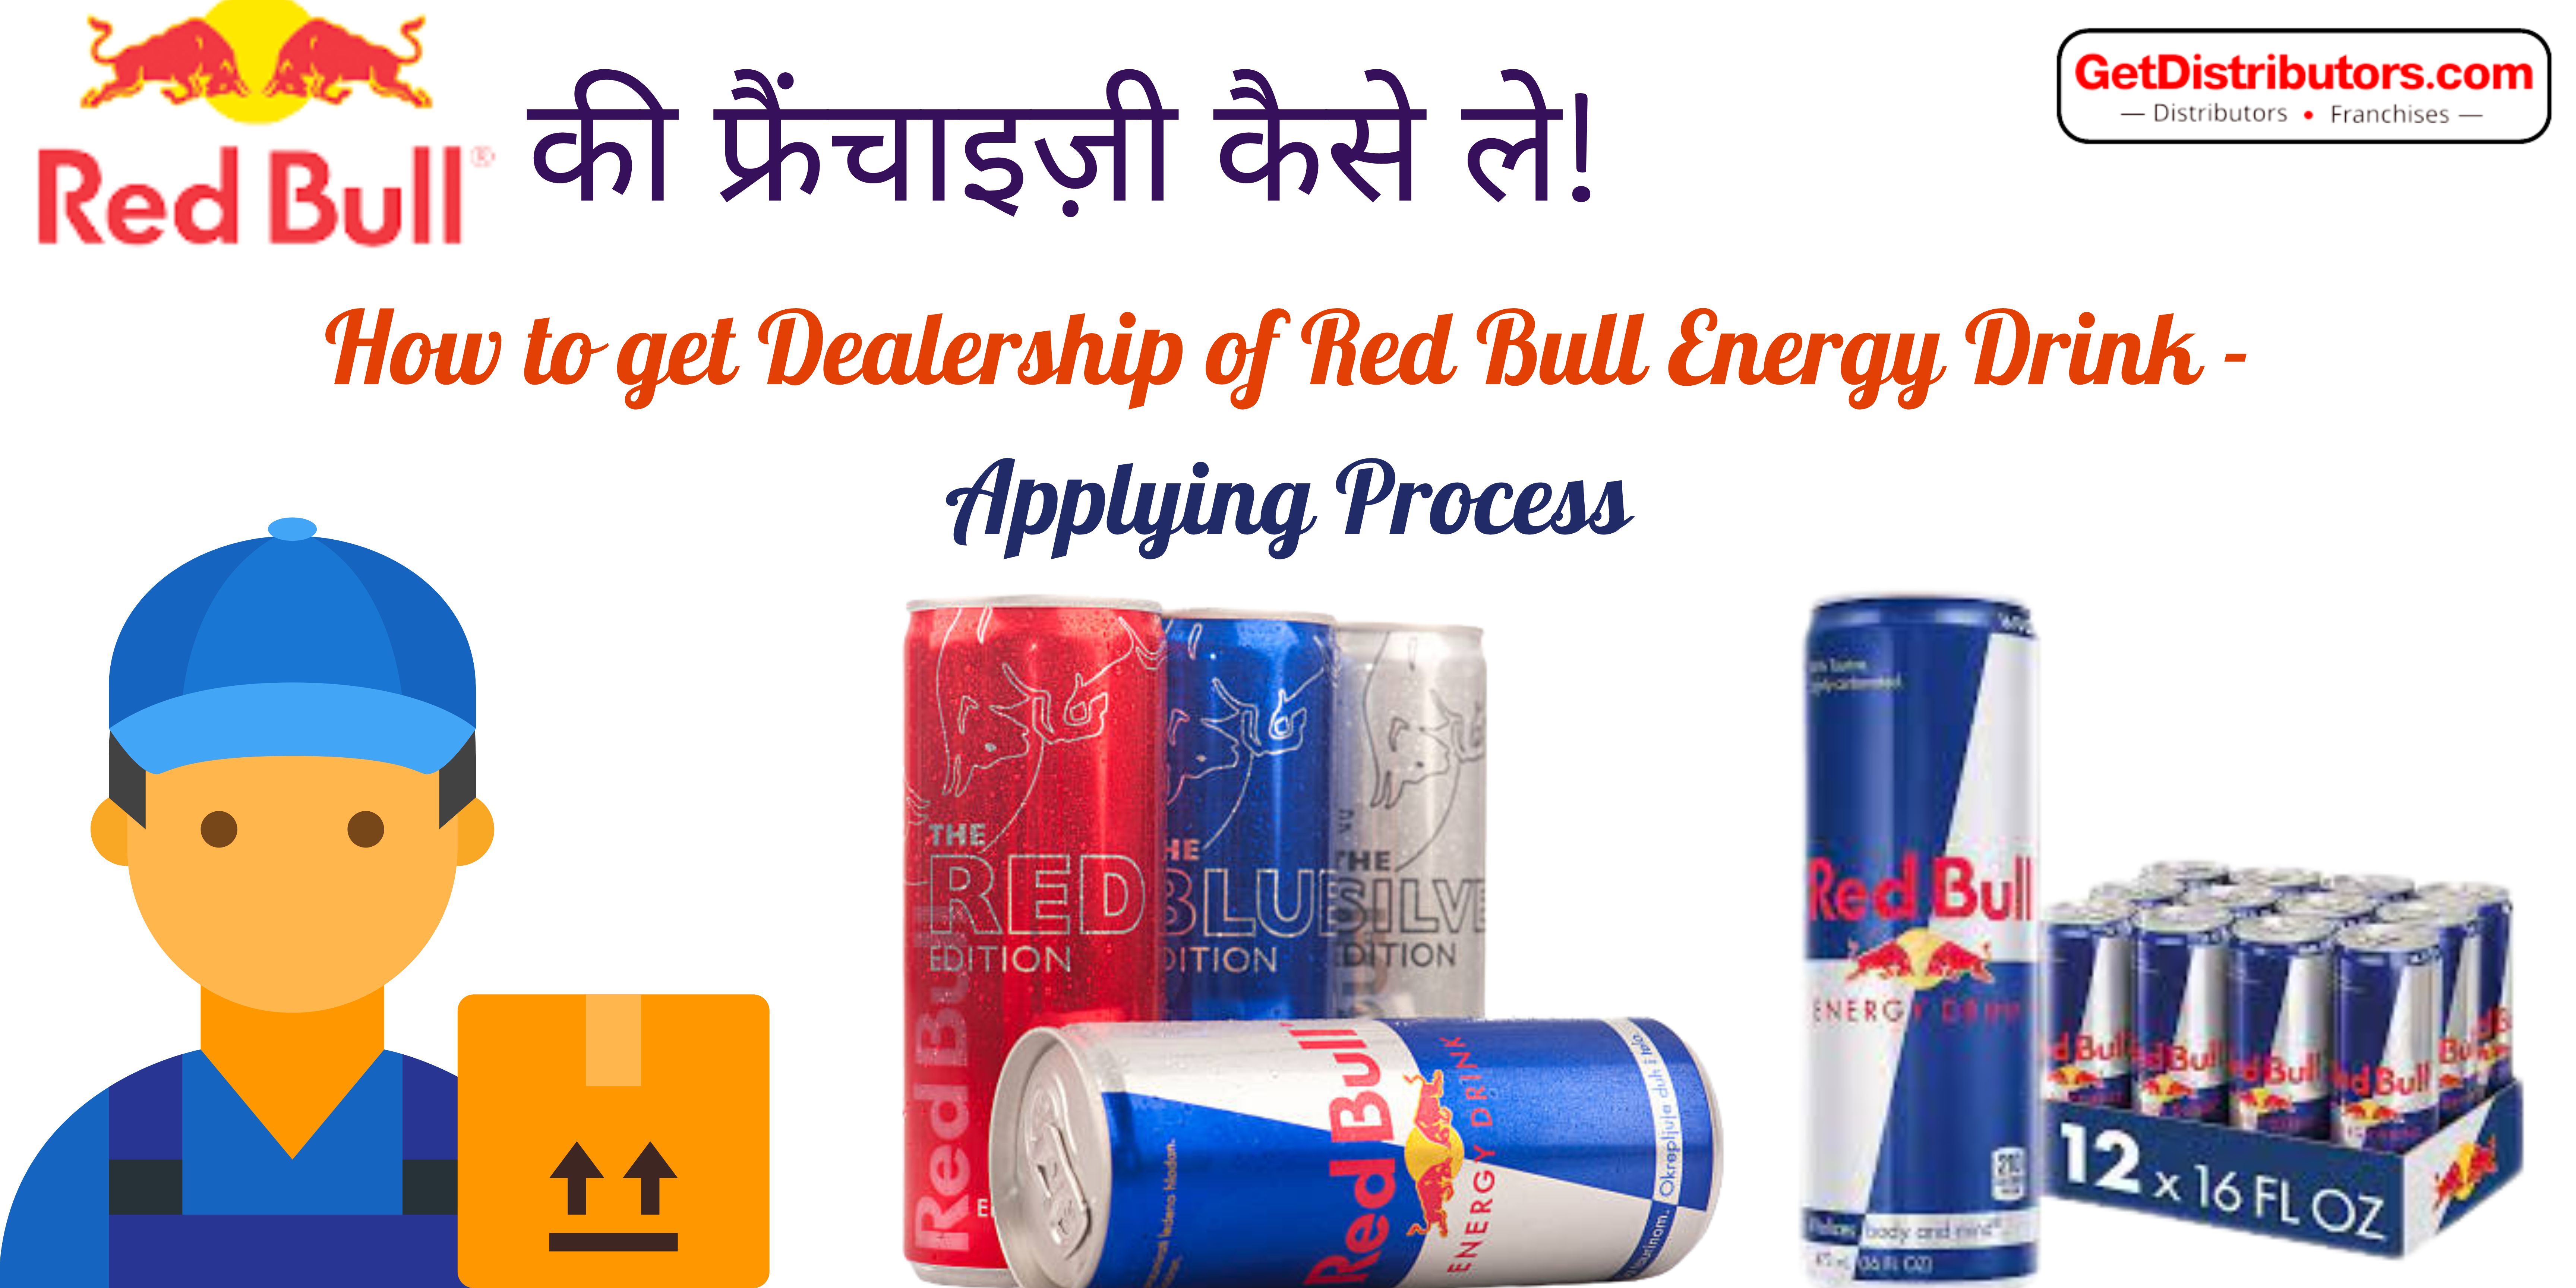 How to get Dealership of Red Bull Energy Drink - Applying Process